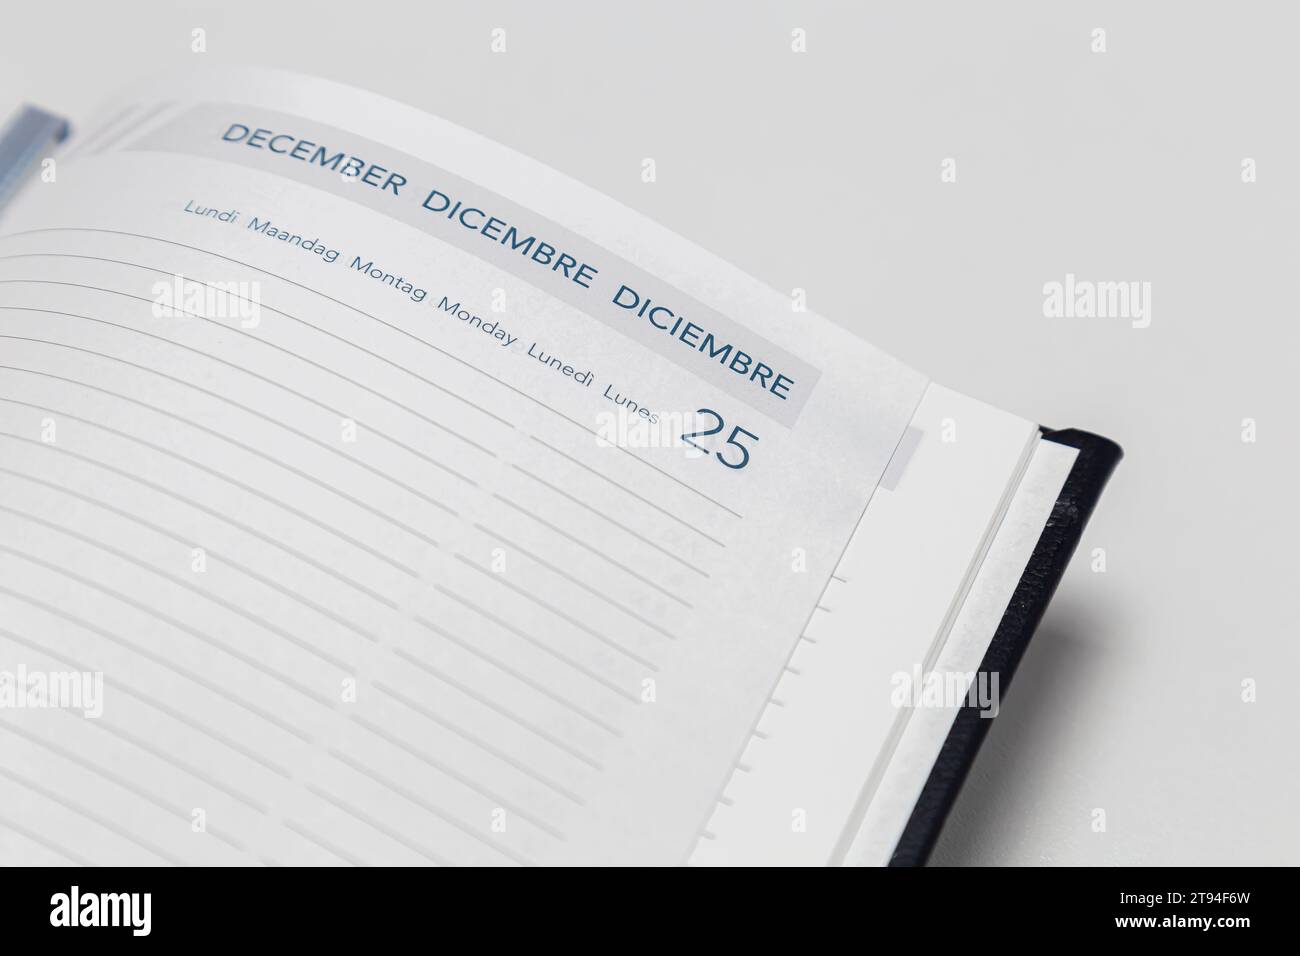 Empty page of planner calendar opened on December 25 Christmas holiday Stock Photo